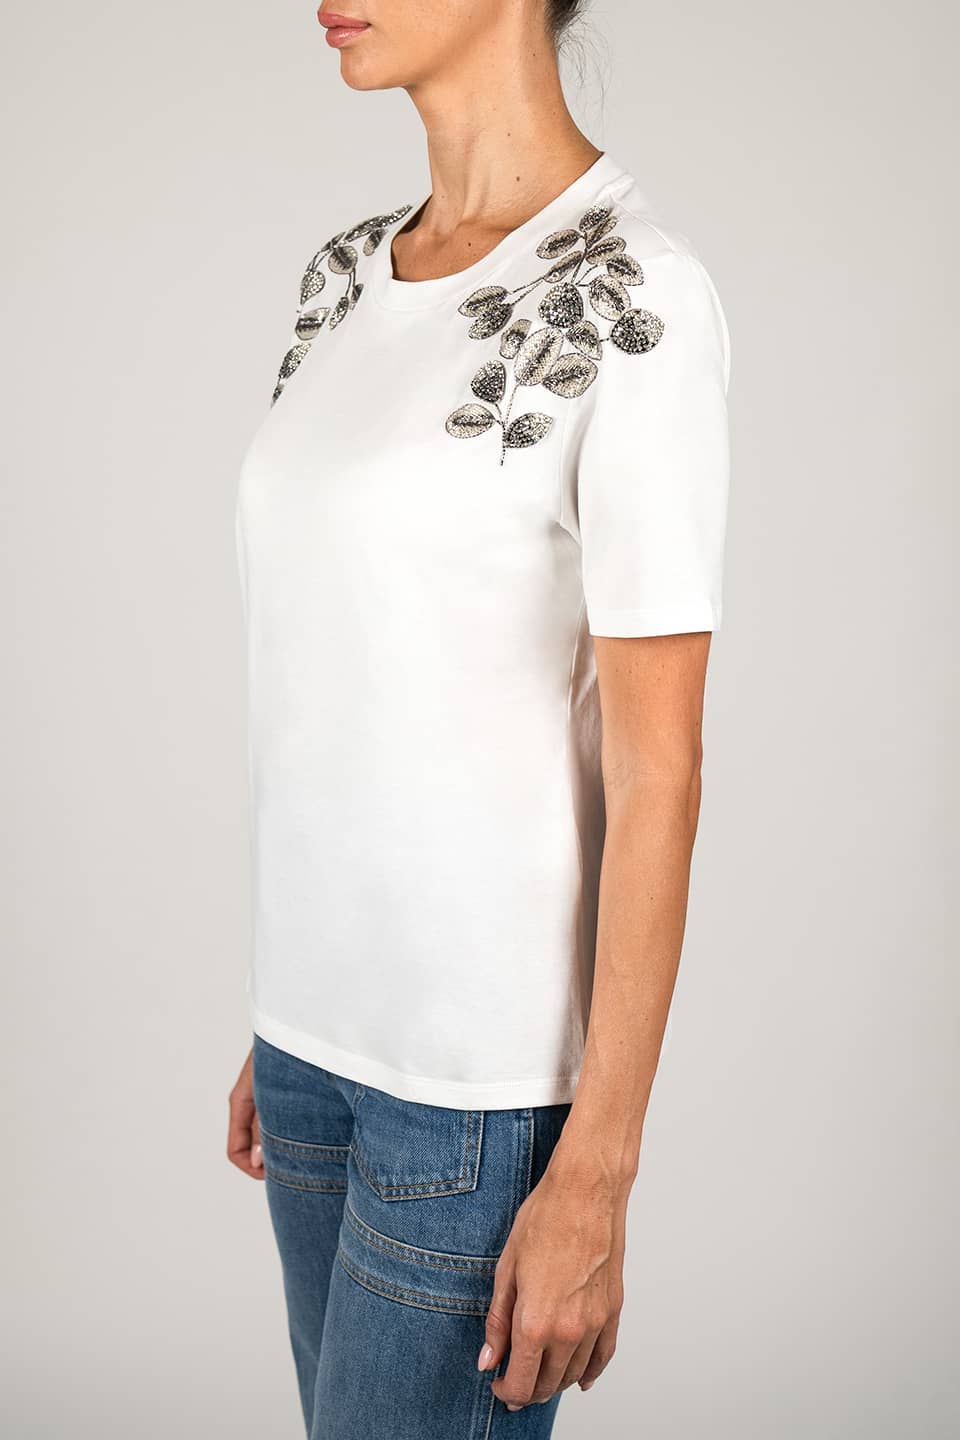 Designer White T-shirt, shop online with free delivery in UAE. Product gallery 2